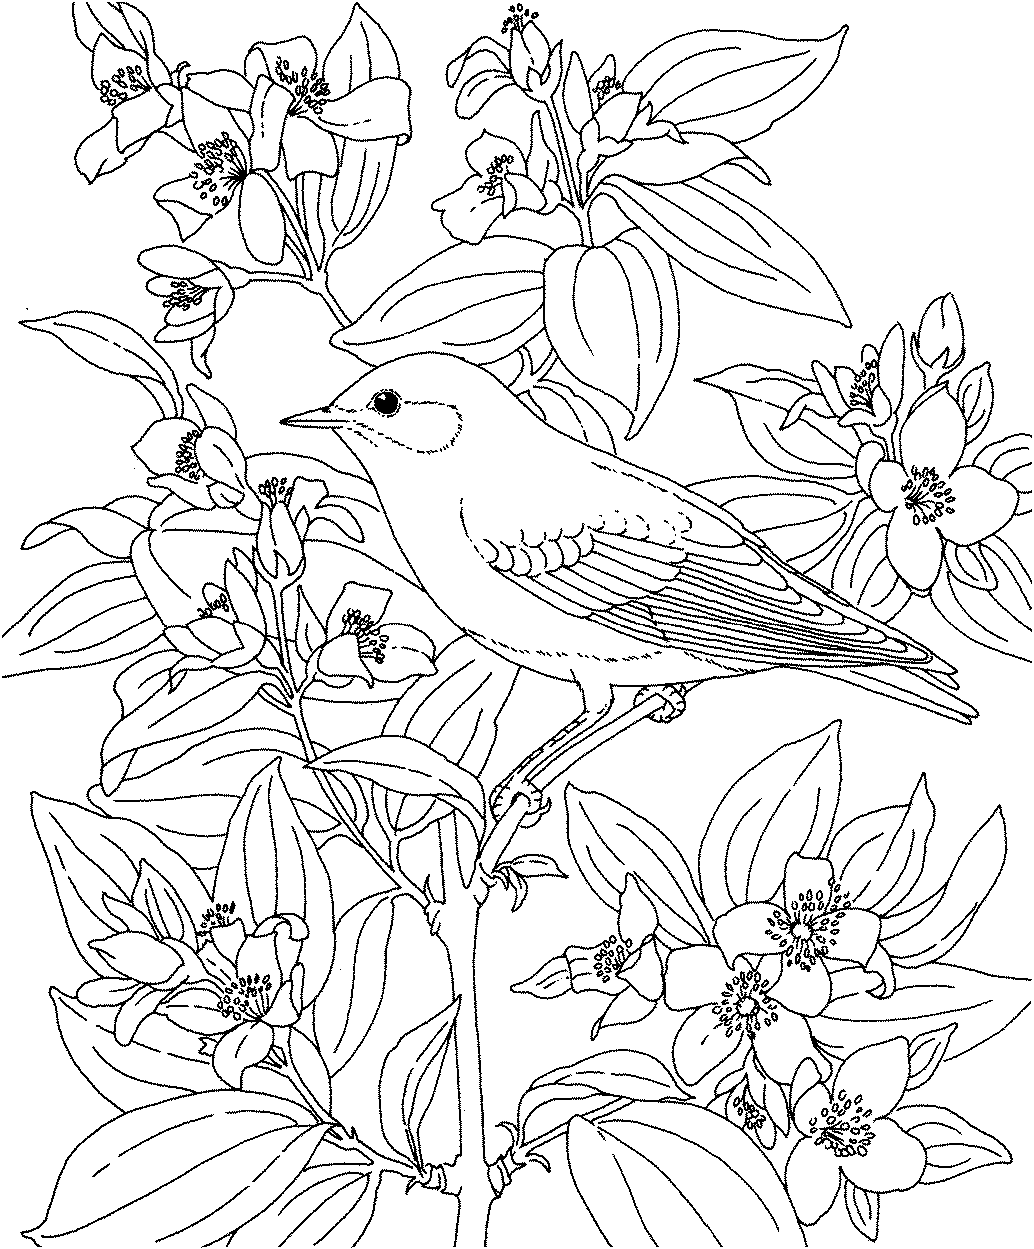 Bird Kids | Coloring Pages for Kids and for Adults